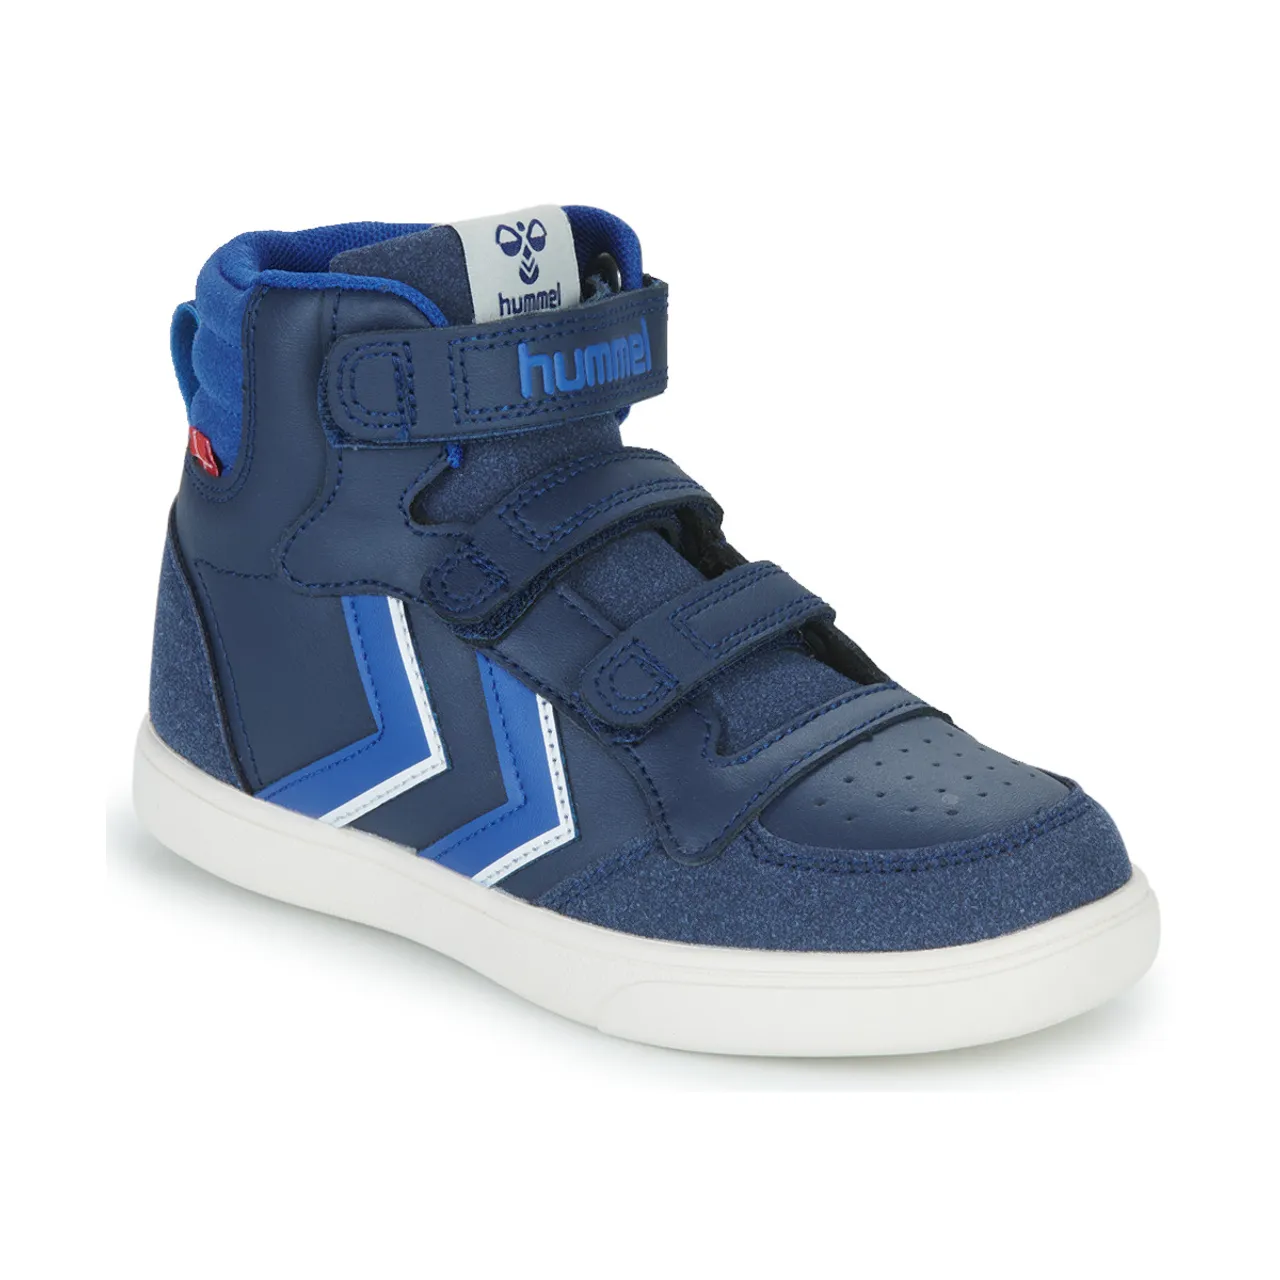 hummel  STADIL PRO JR  boys's Children's Shoes (High-top Trainers) in Marine